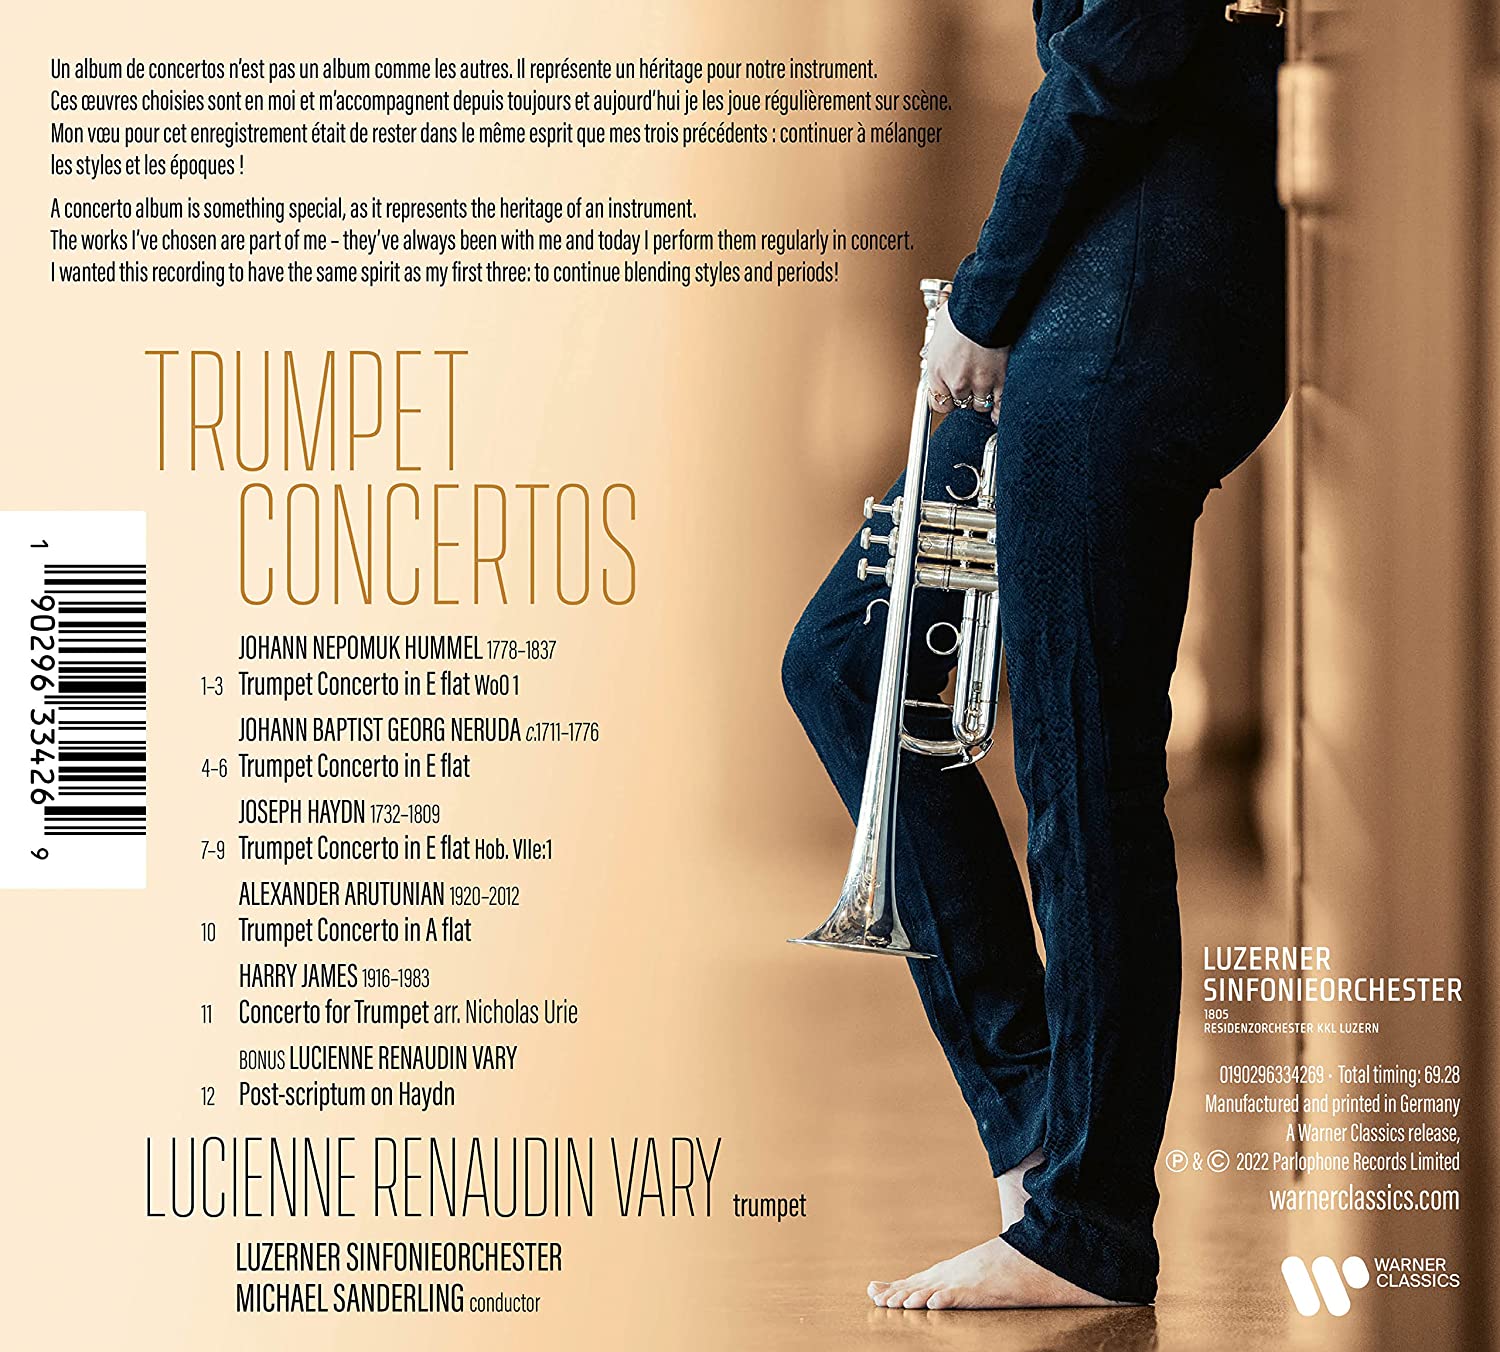 Trumpet Concertos | Lucienne Renaudin Vary